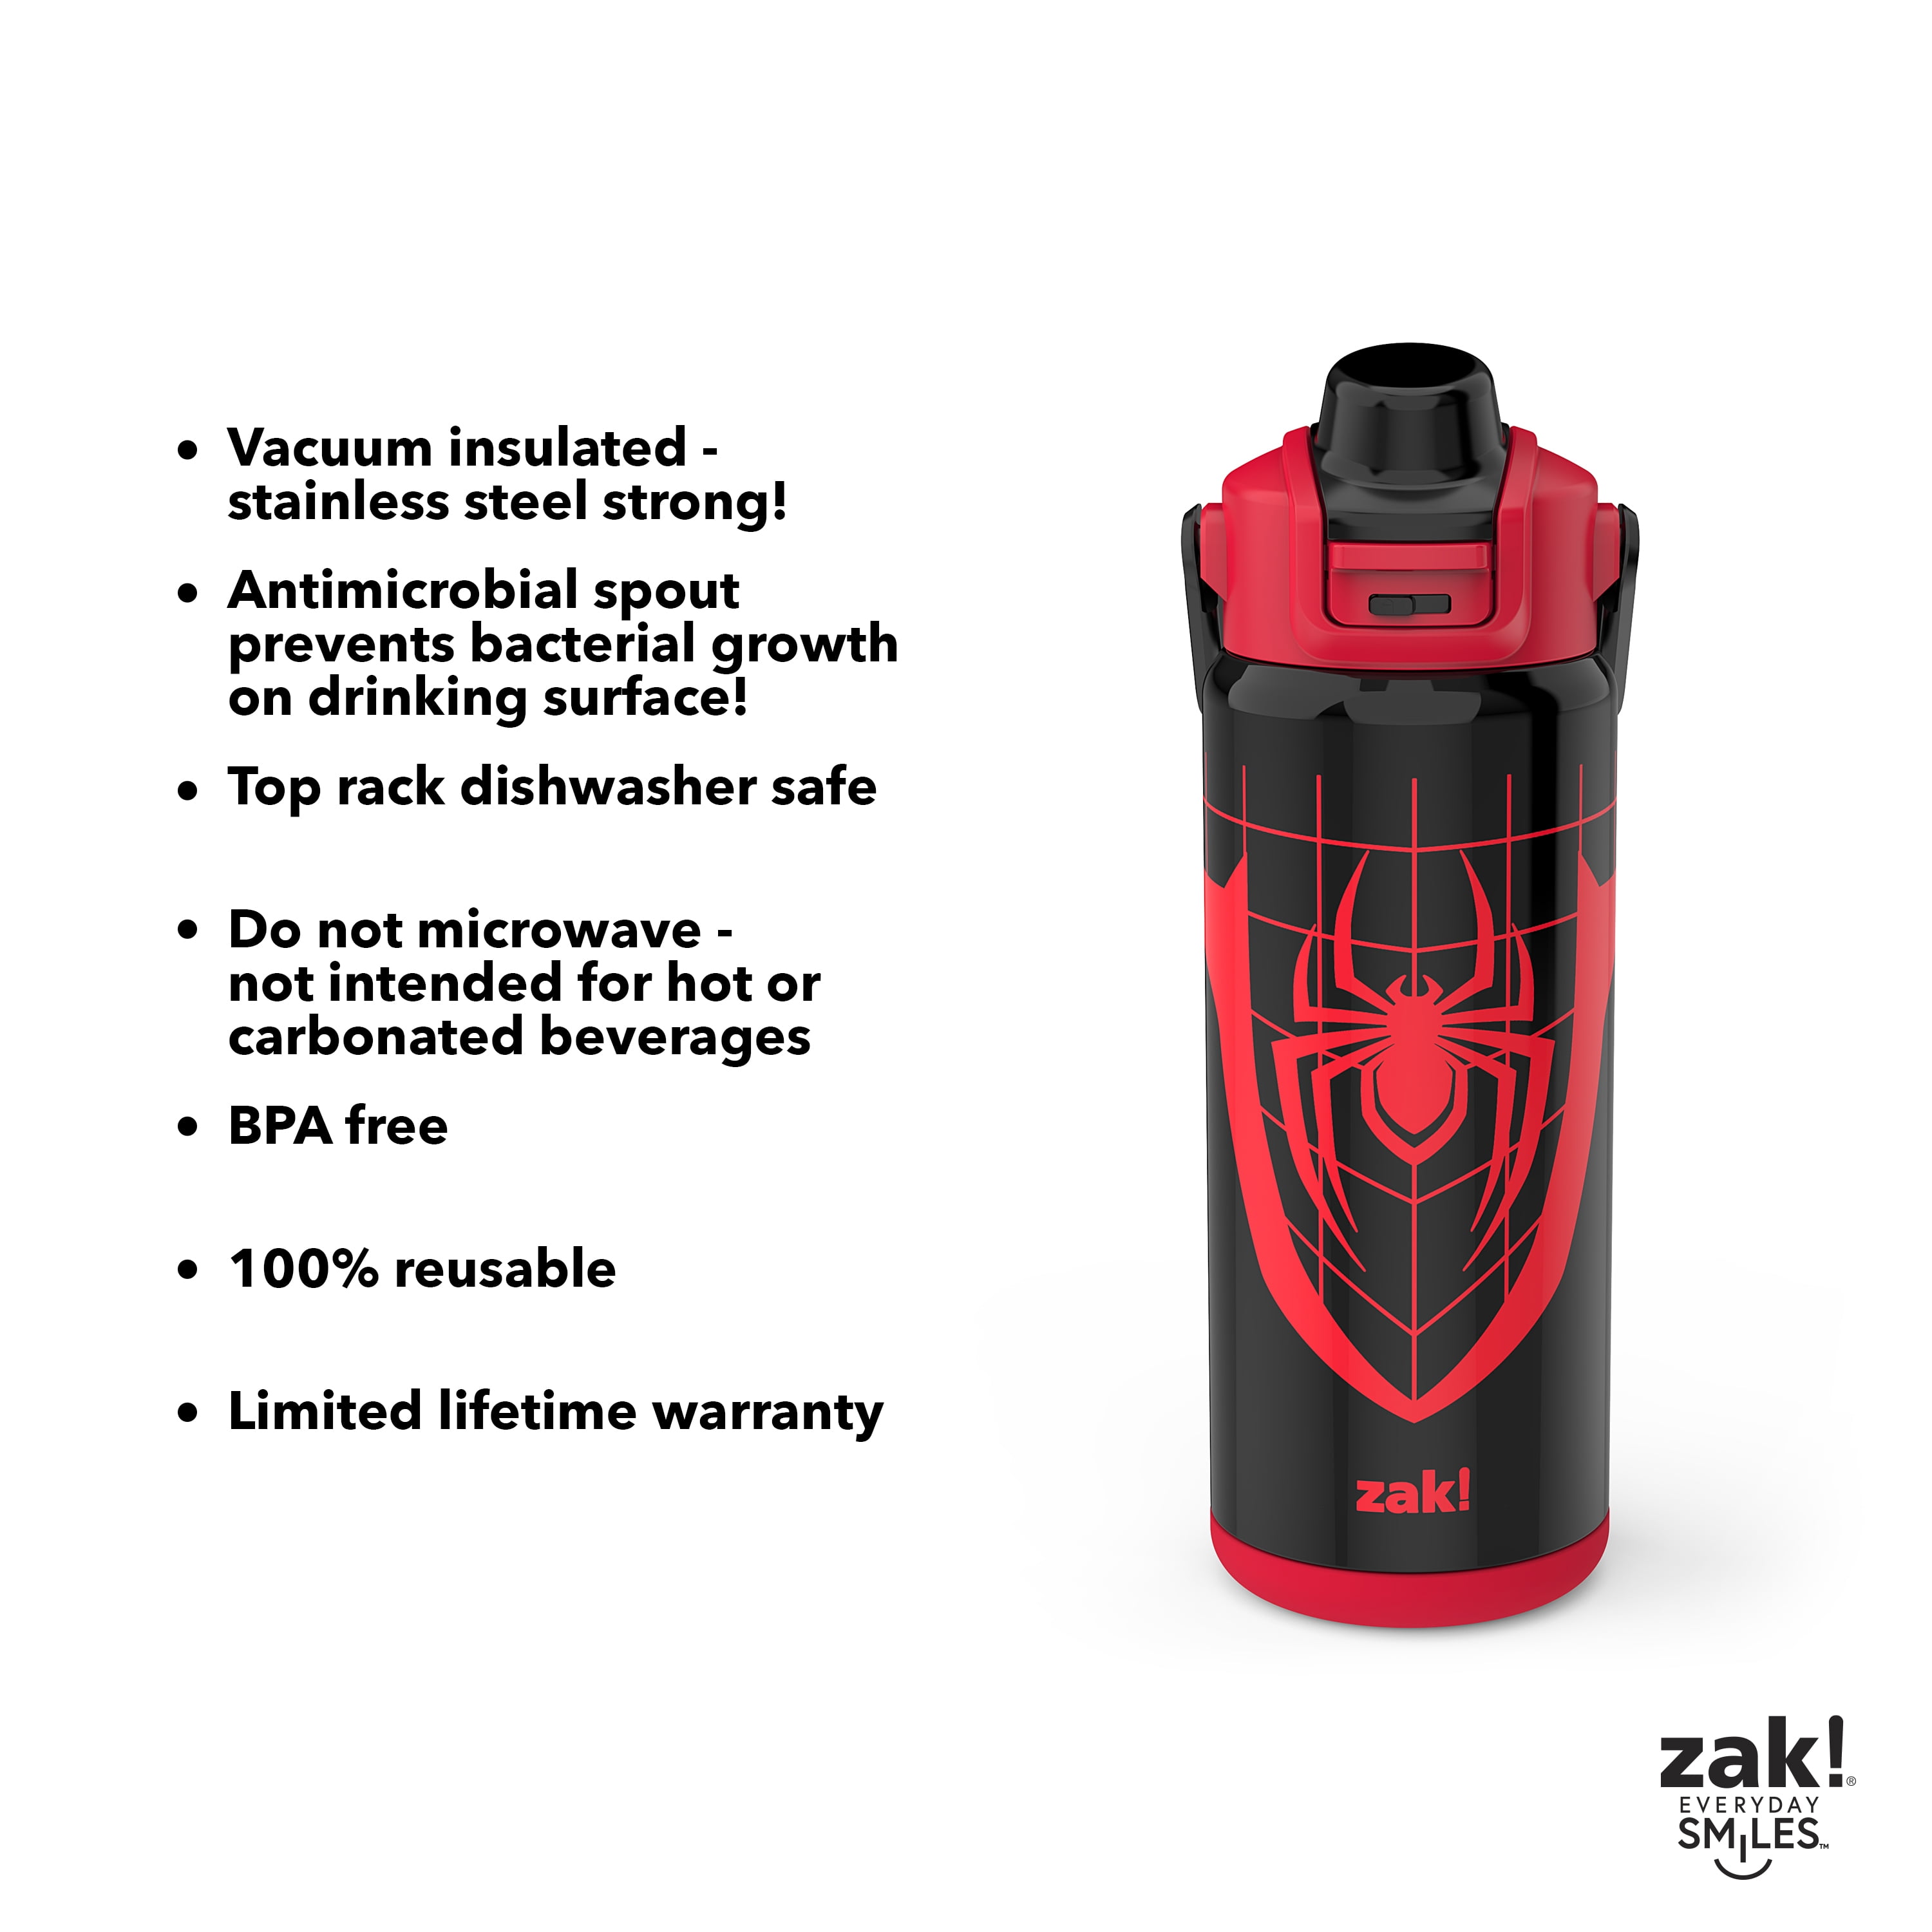 Superman OFFICIAL Character 18 oz Insulated Water Bottle, Leak Resistant,  Vacuum Insulated Stainless Steel with 2-in-1 Loop Cap